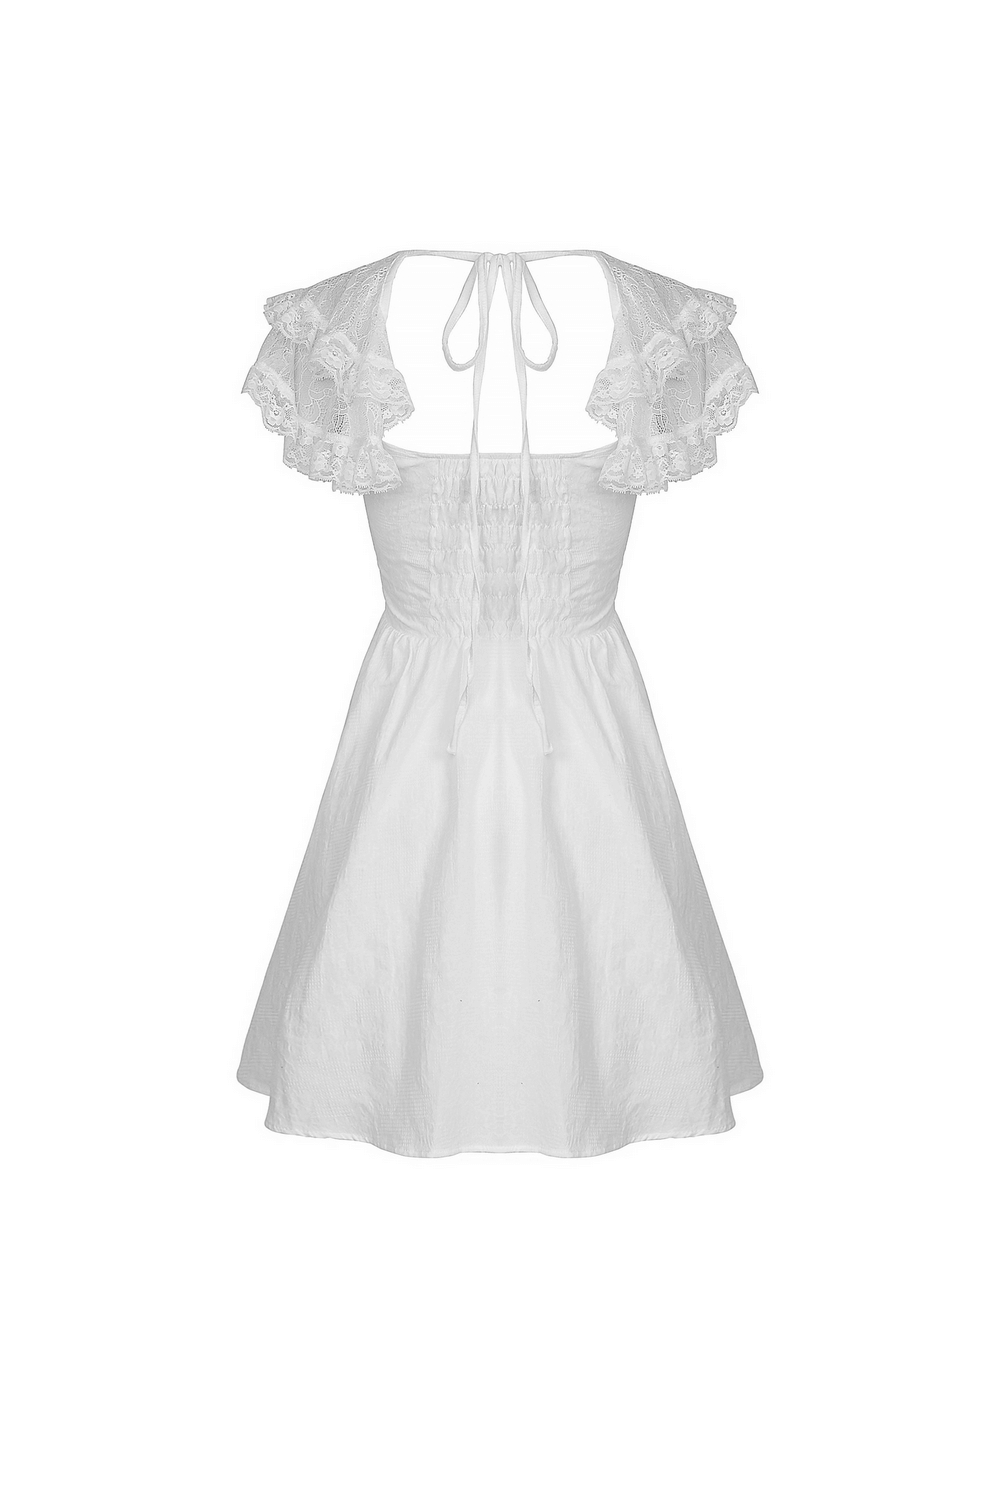 Angelic Women's Mini Dress with Lace and Beading